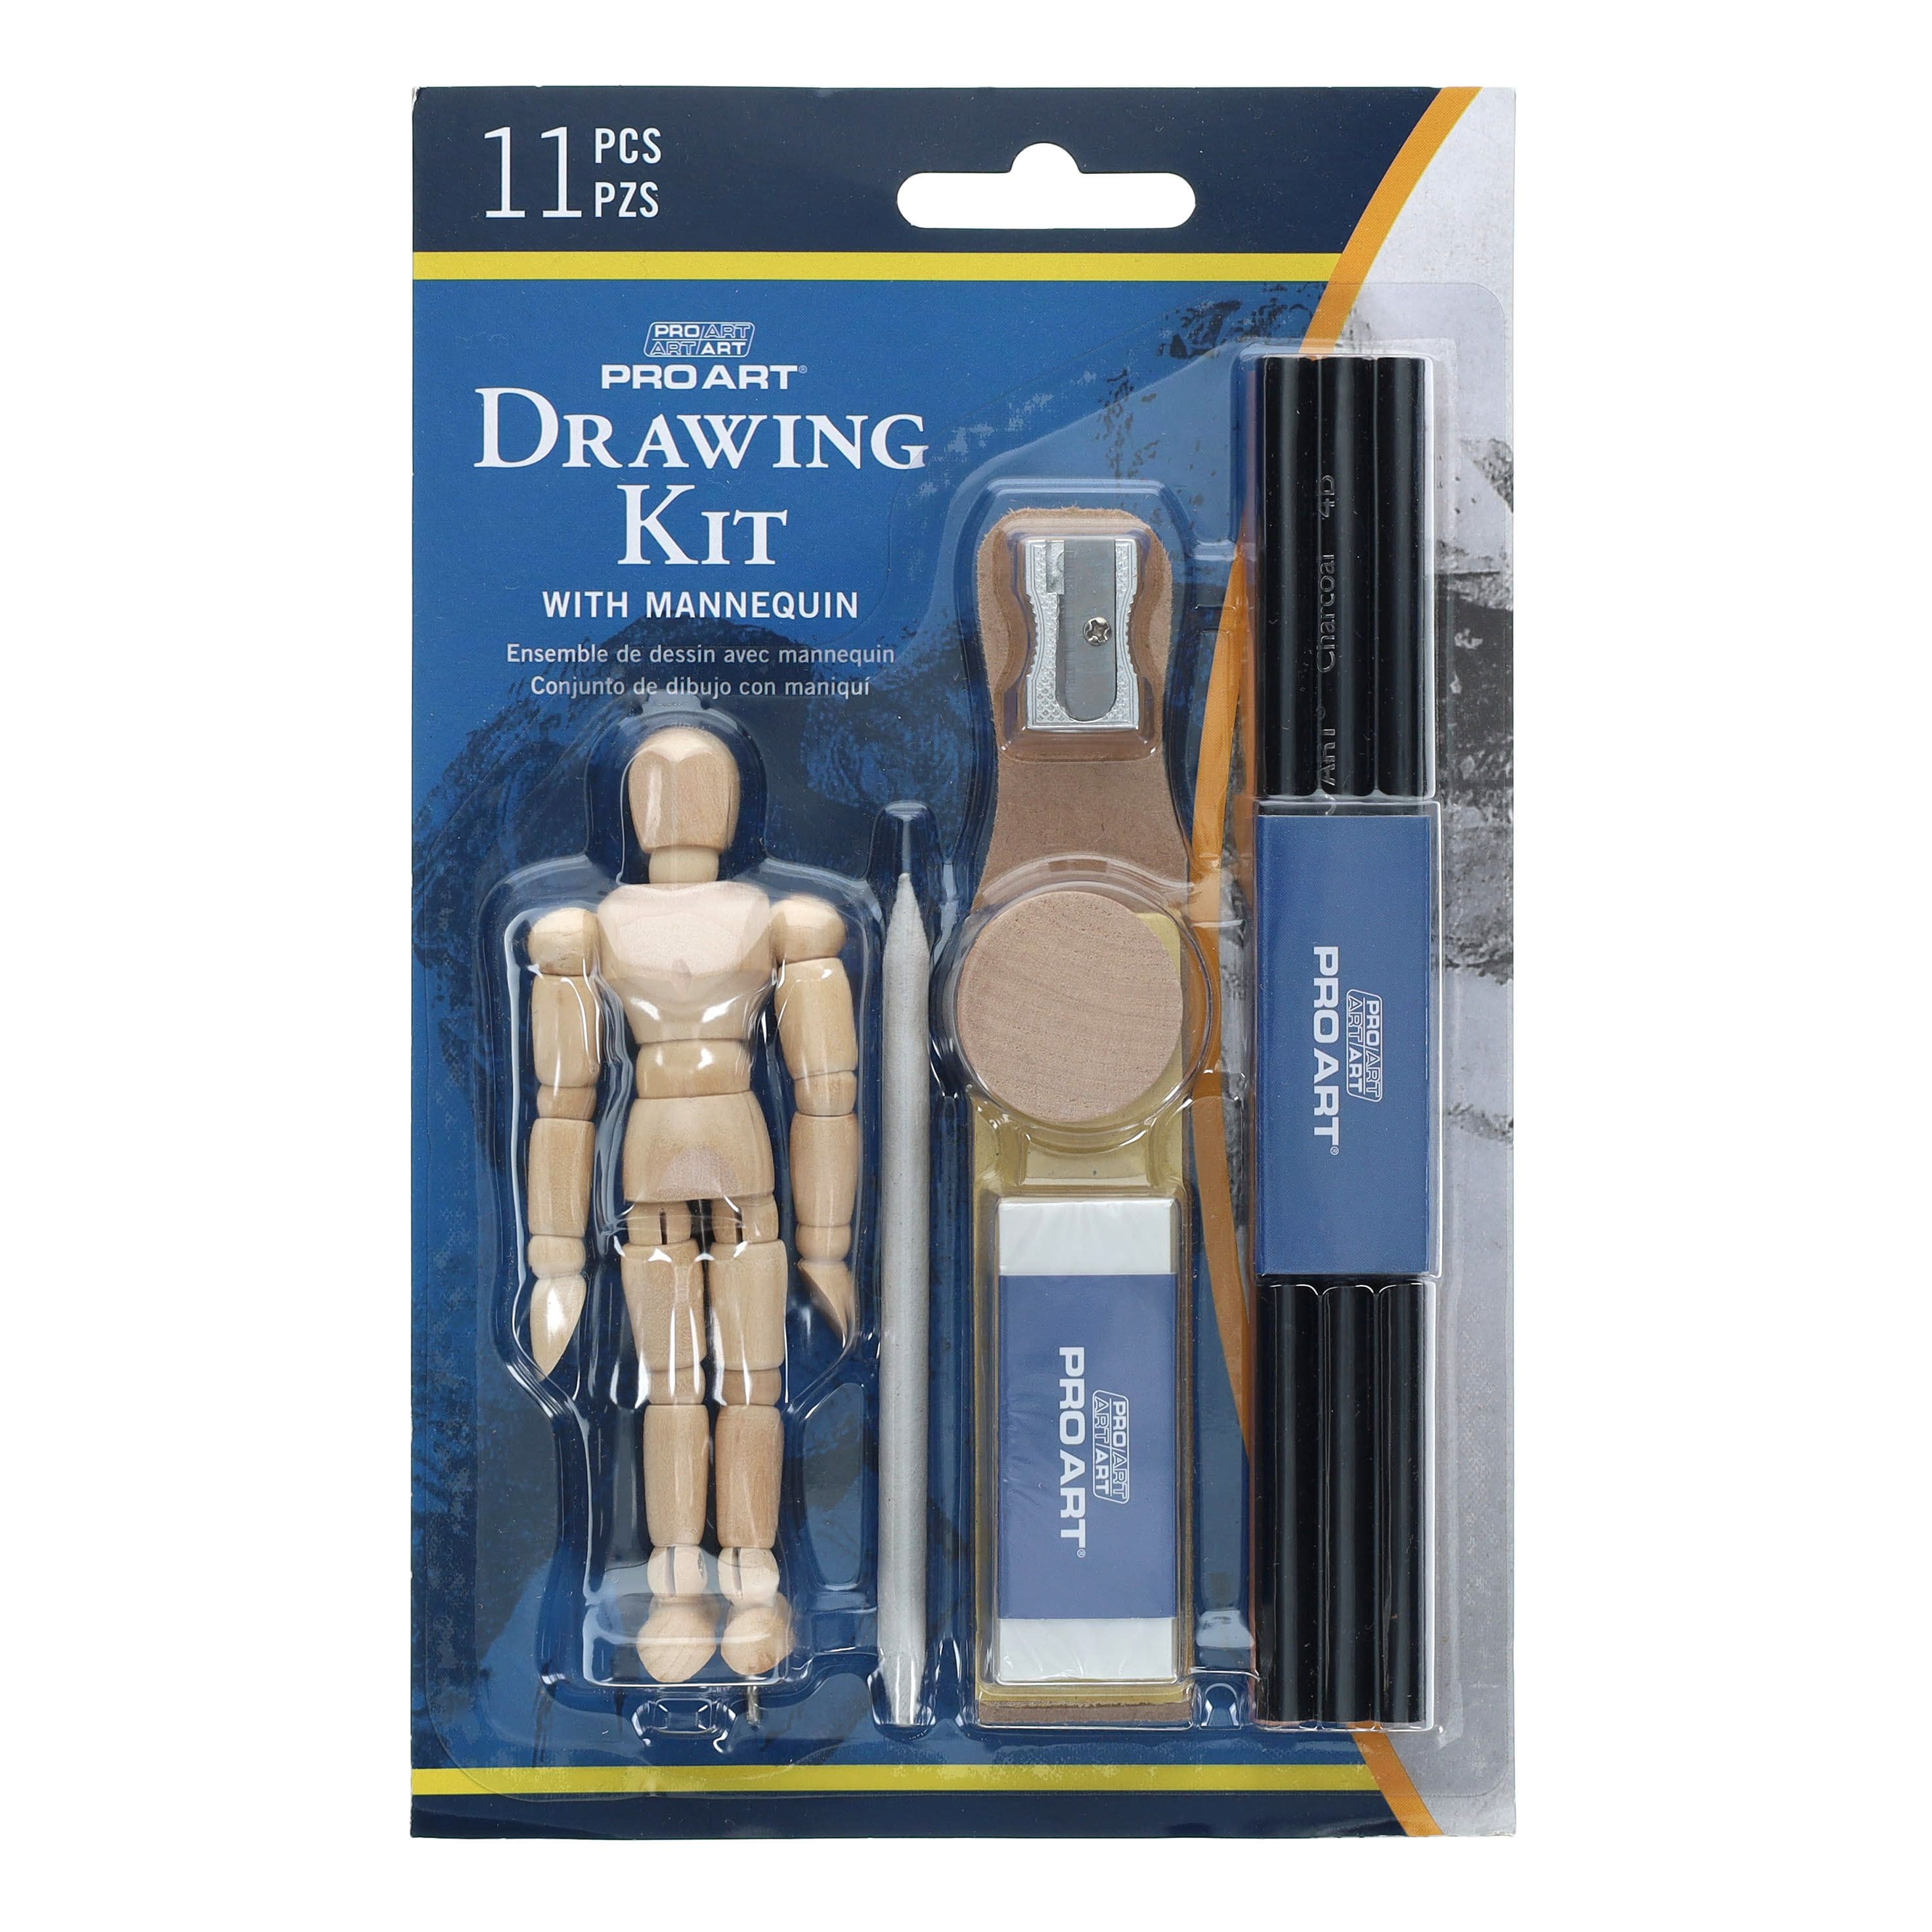 Pro Art Mannequin All In One Drawing Set - 11 Piece